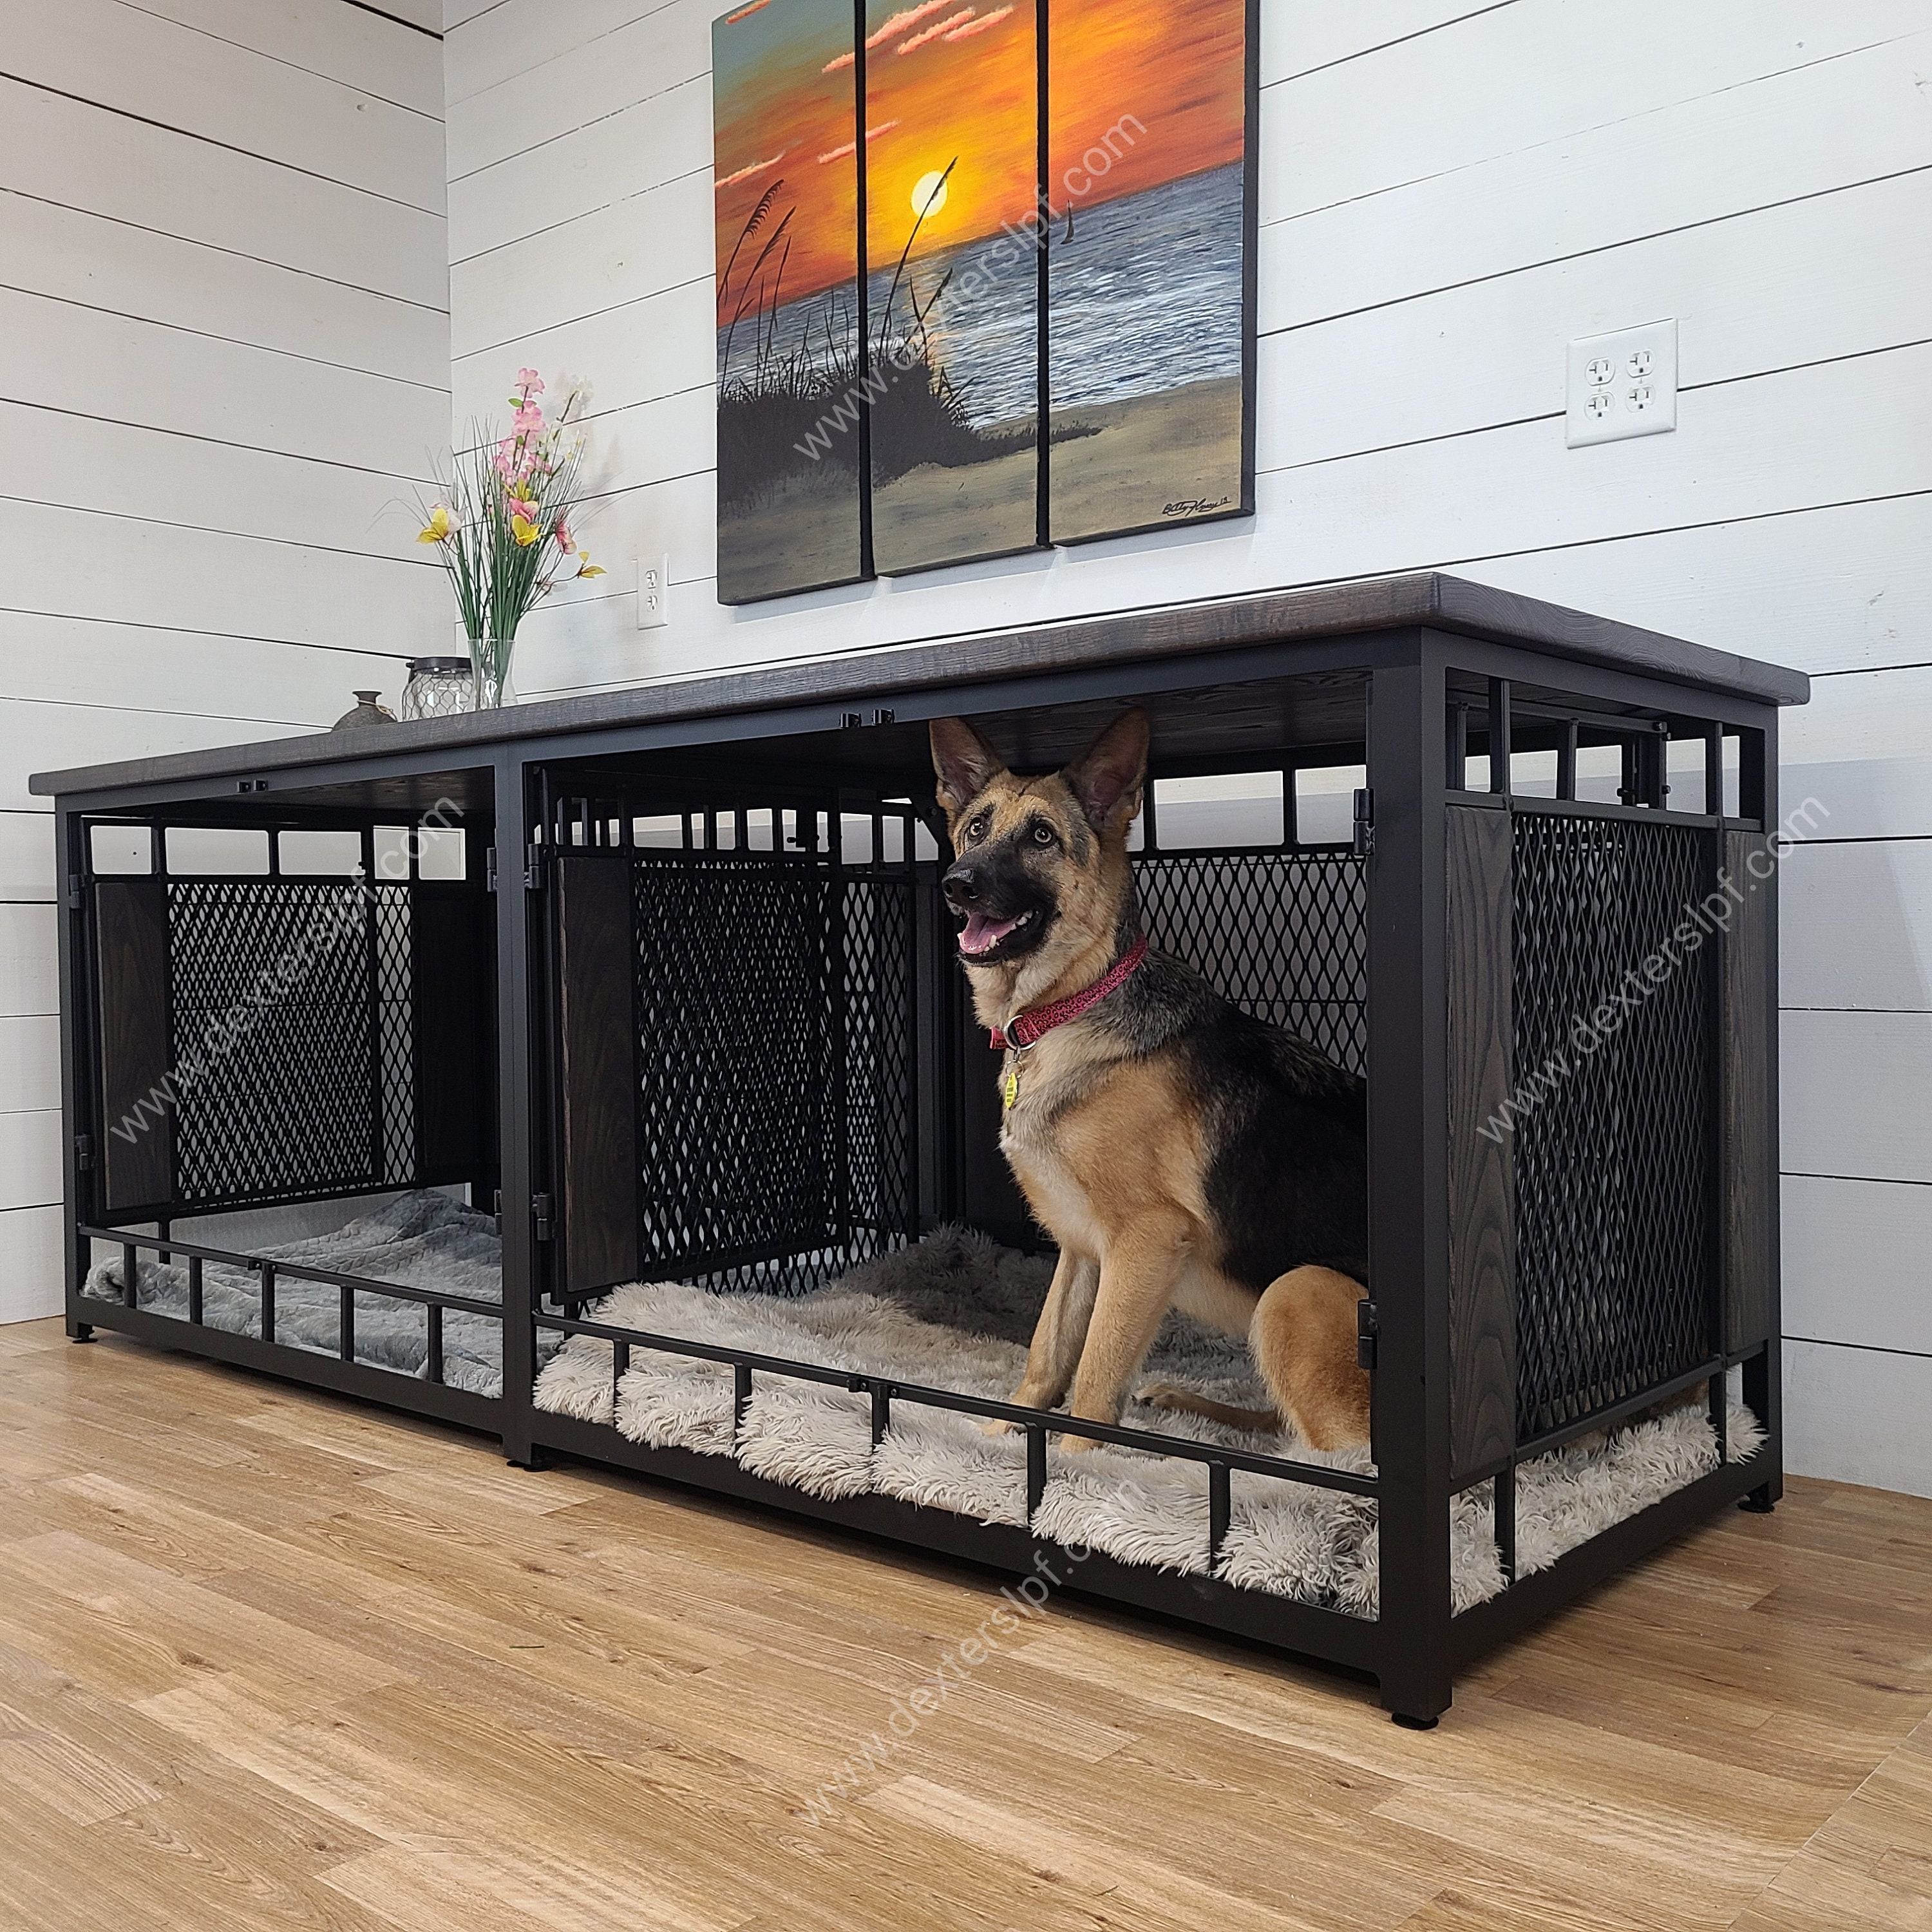 how long can you crate a dog for